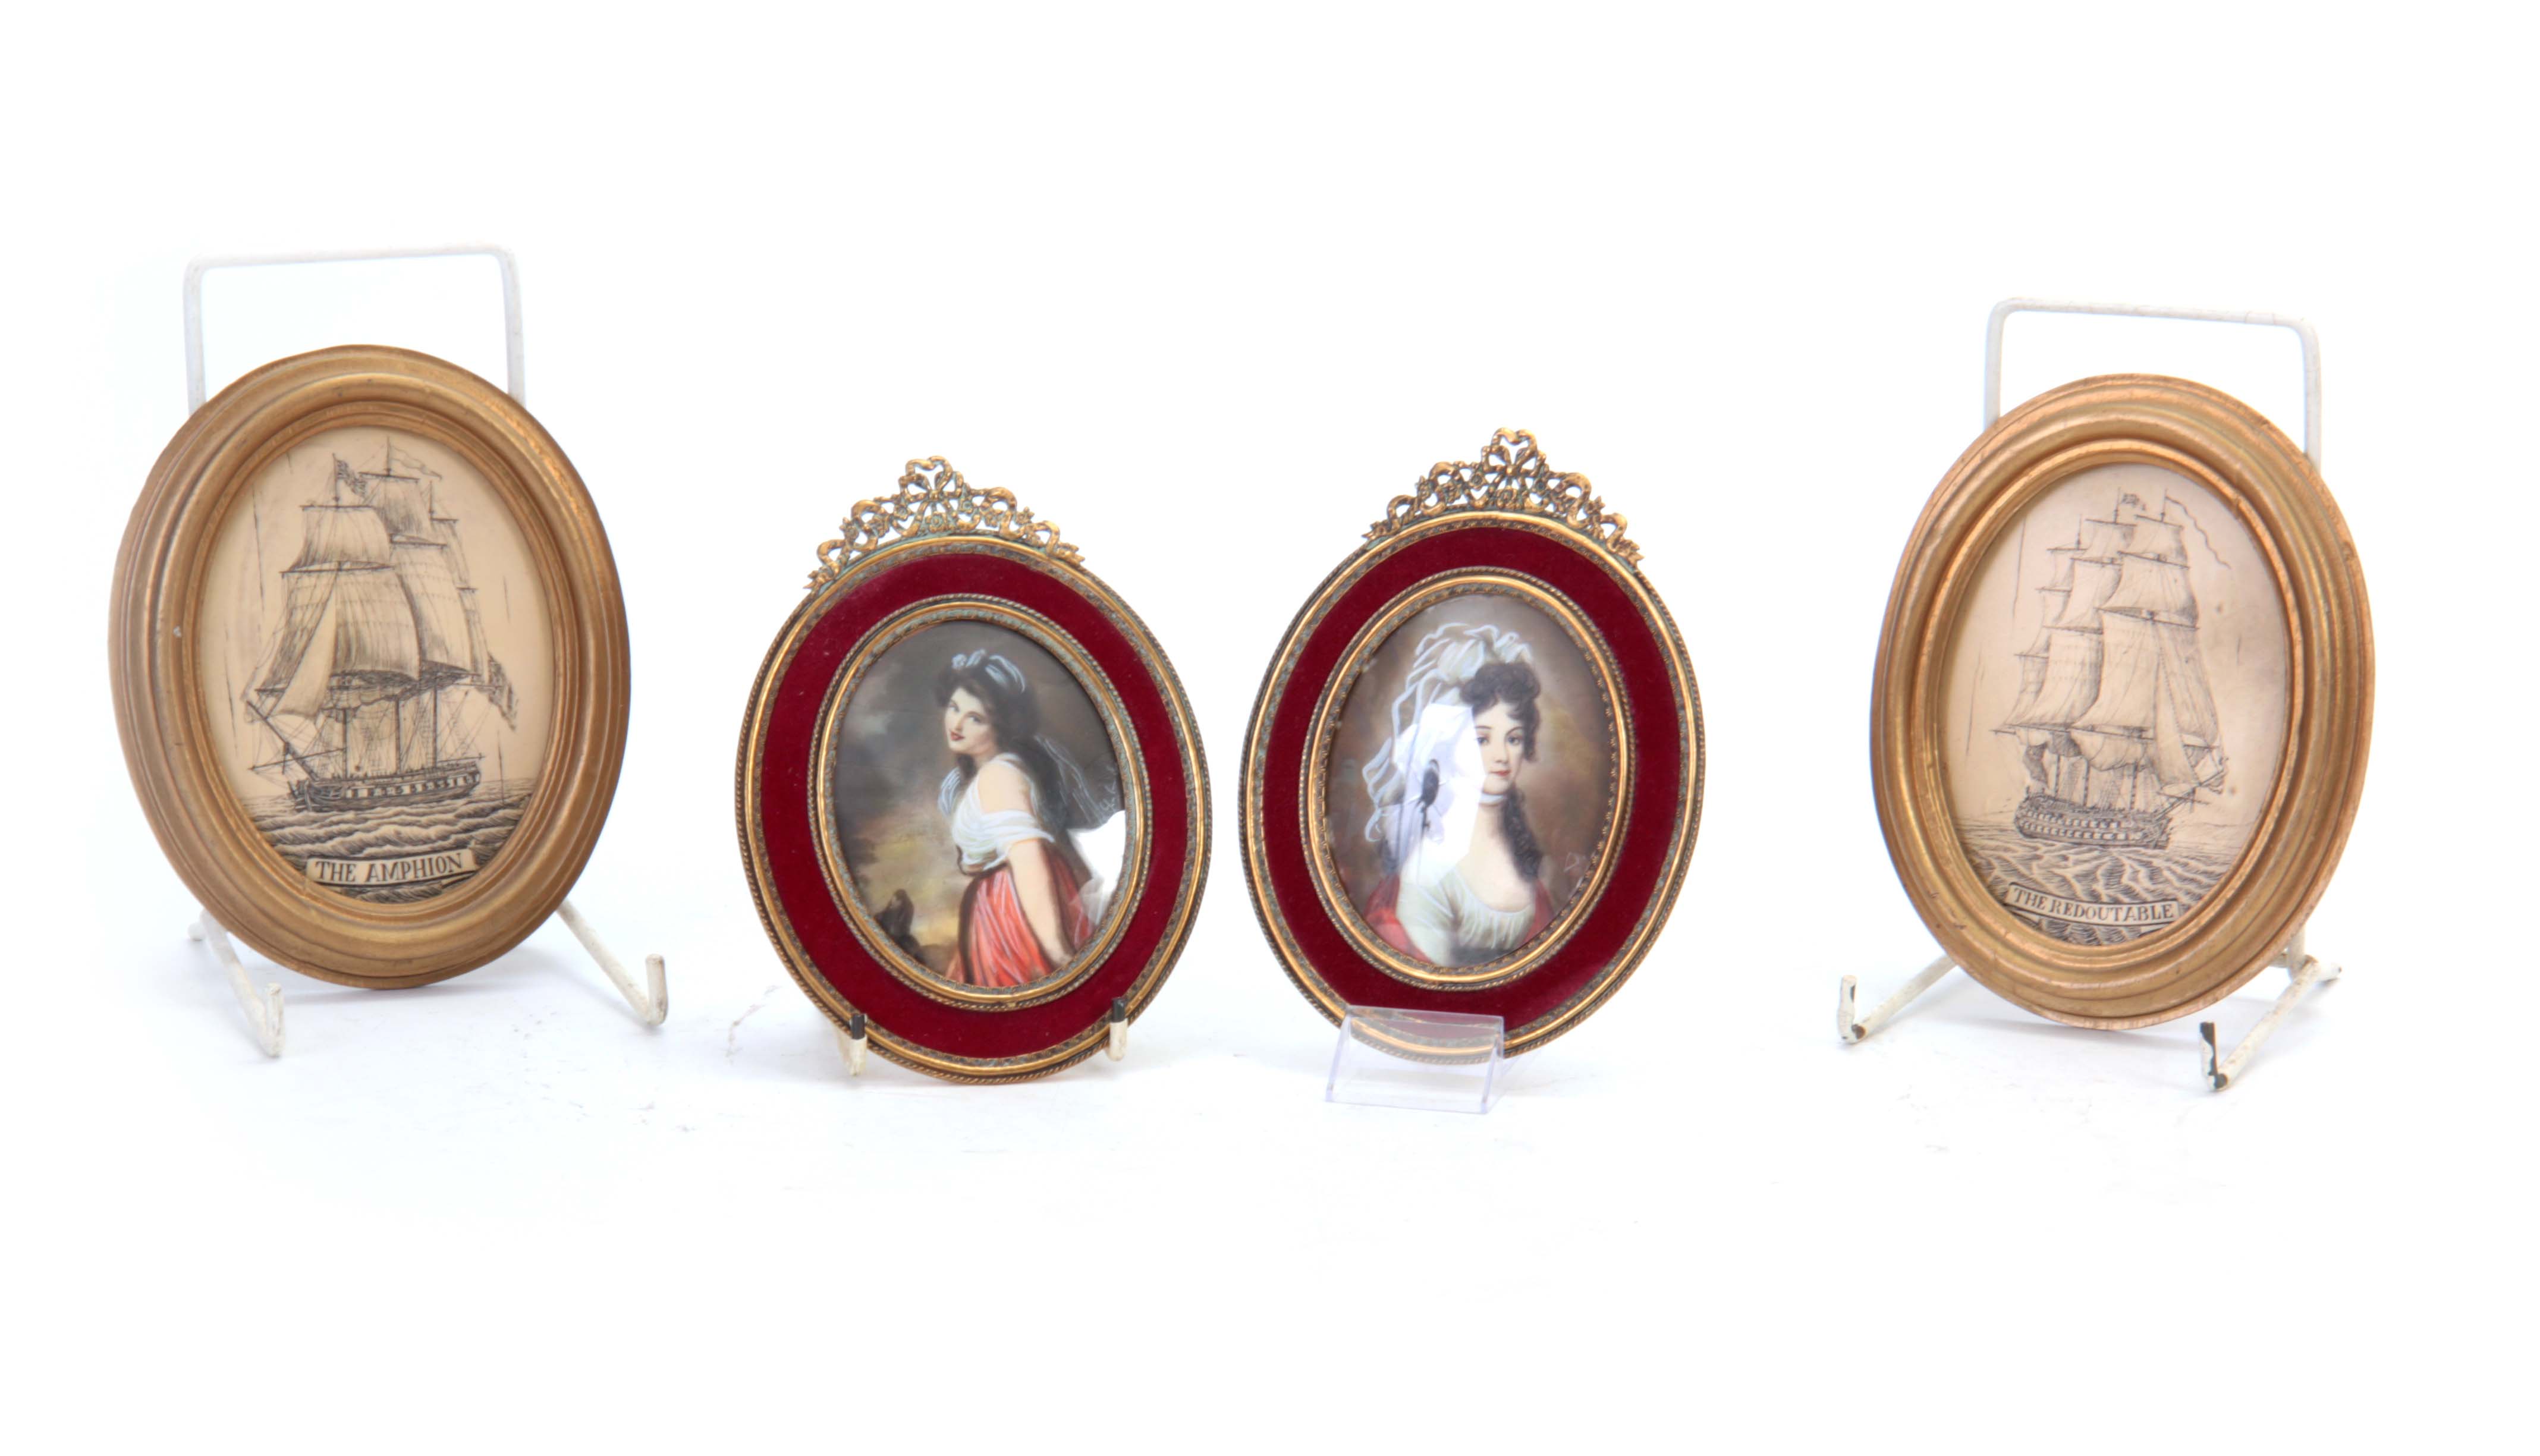 A PAIR OF OVAL MINIATURES of a young maiden 10.5cm wide including frame, together with A PAIR OF